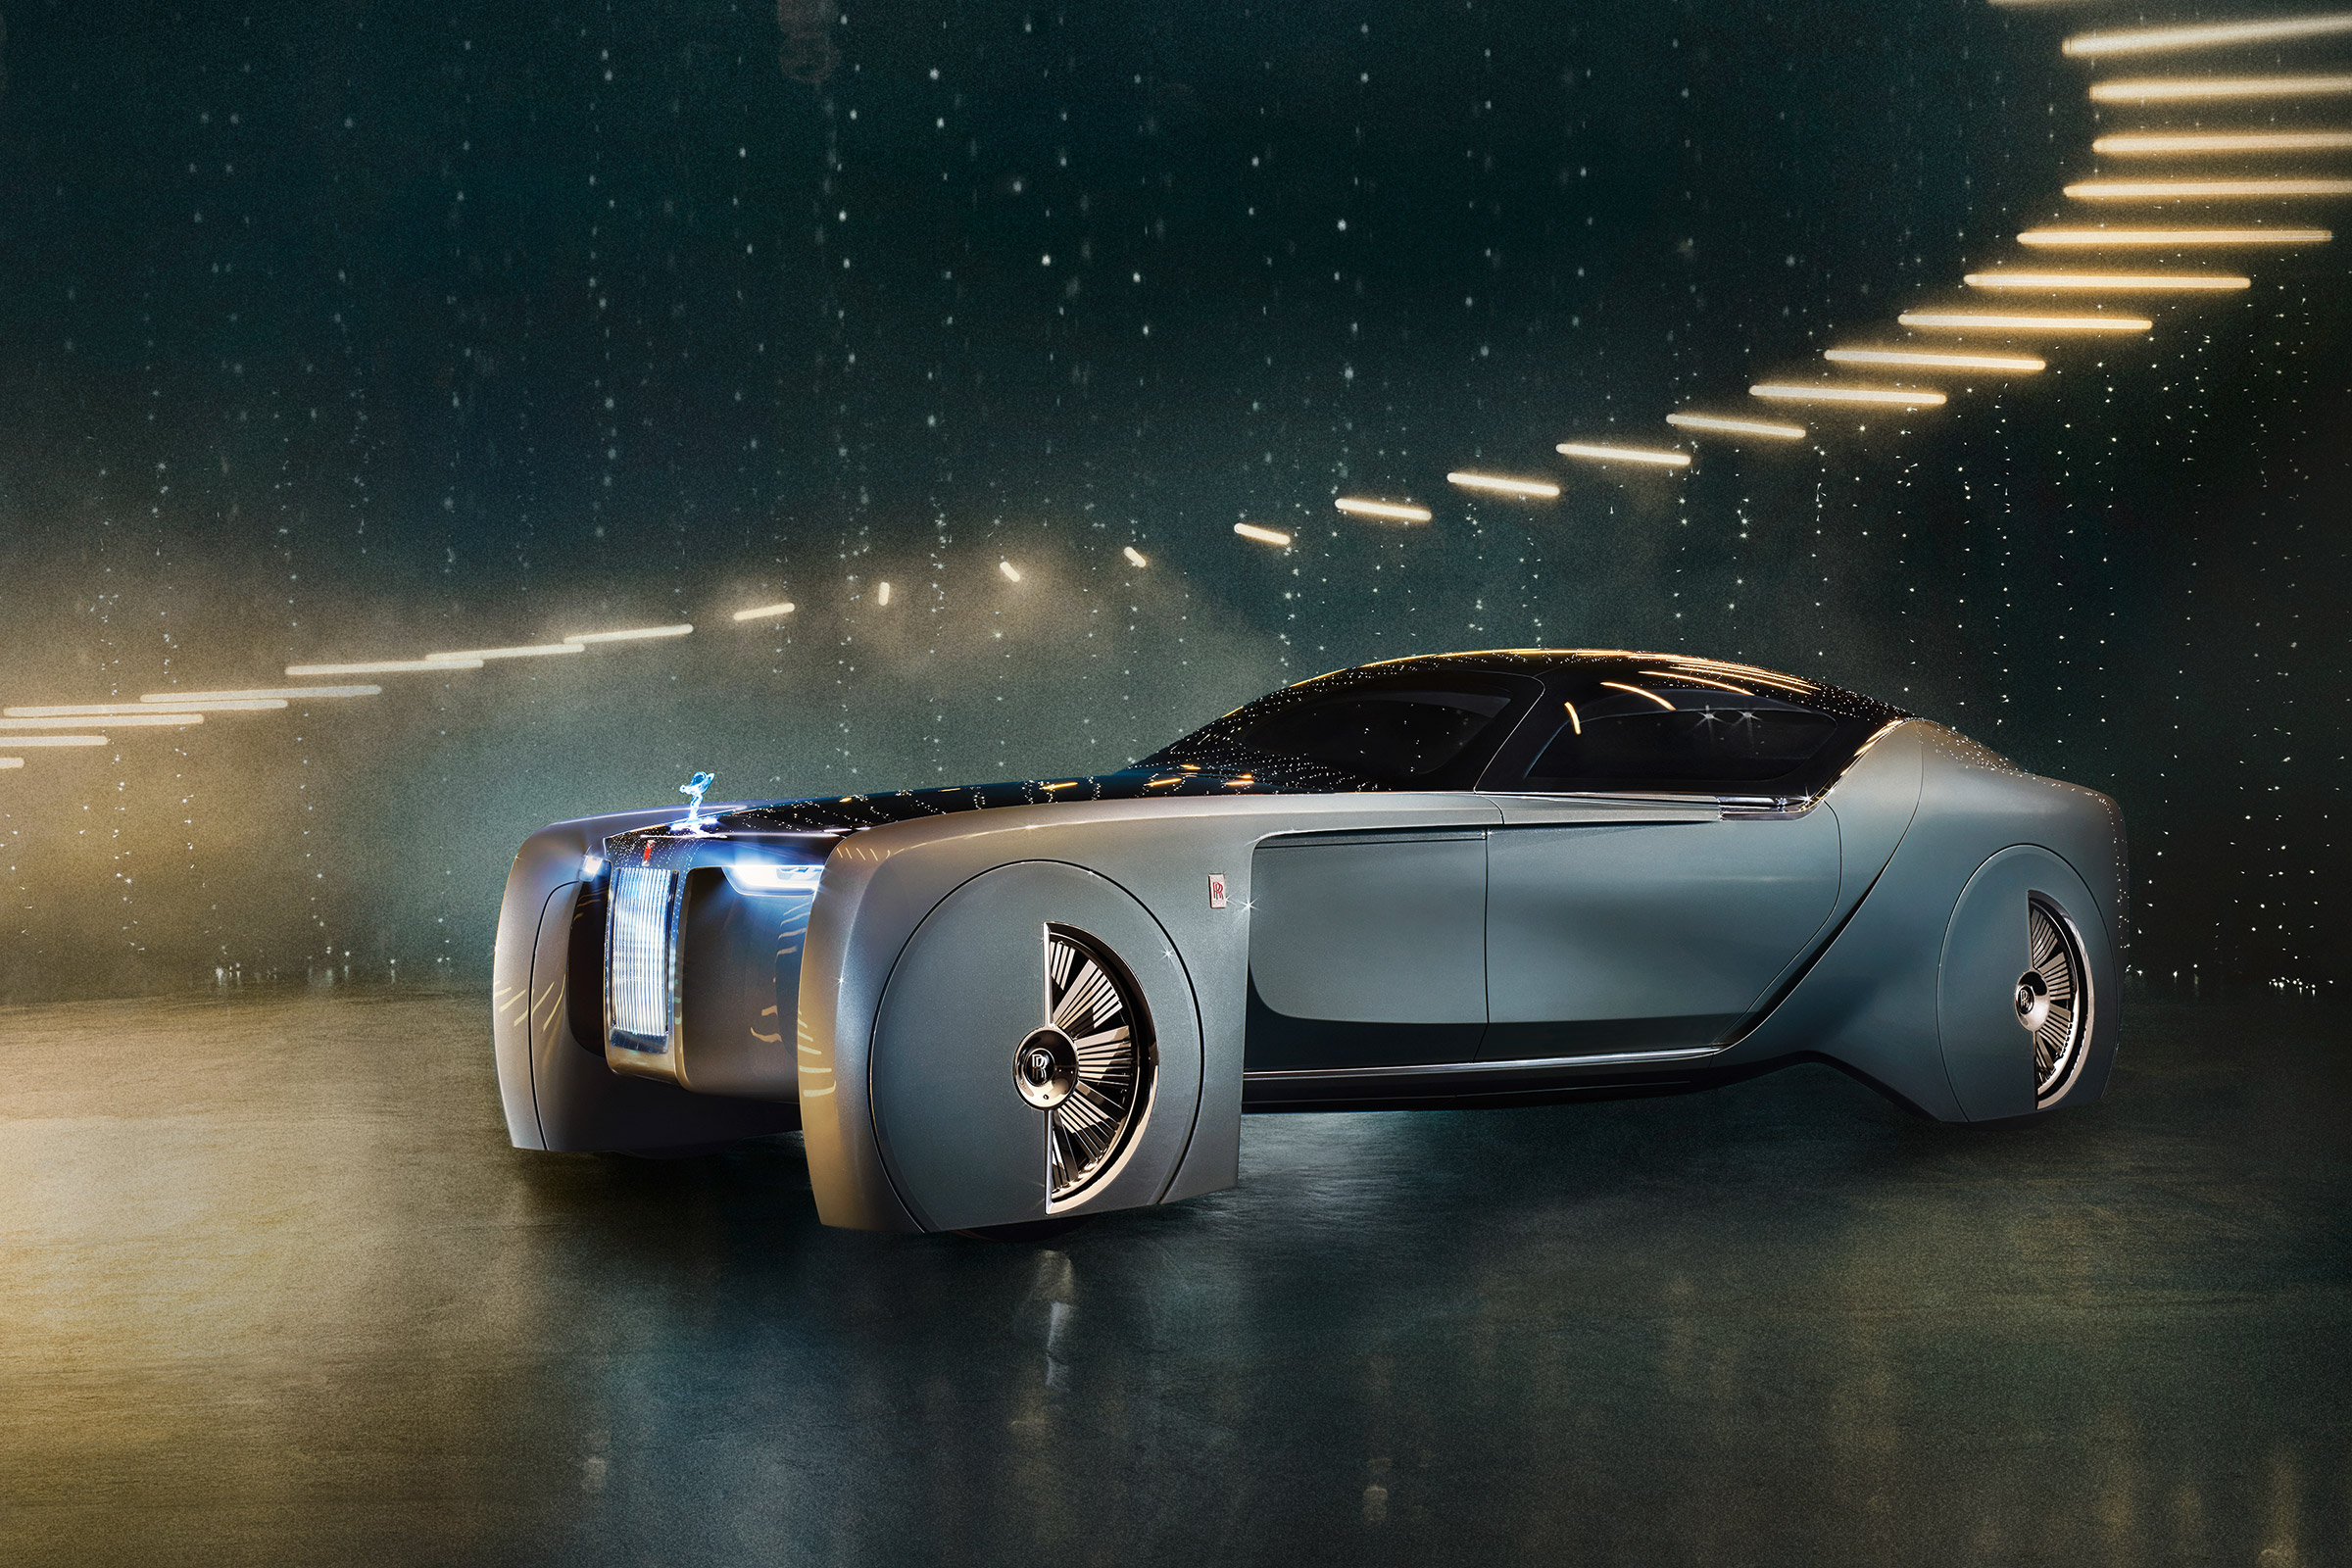 Rolls Royce future car the Vision Next 100�